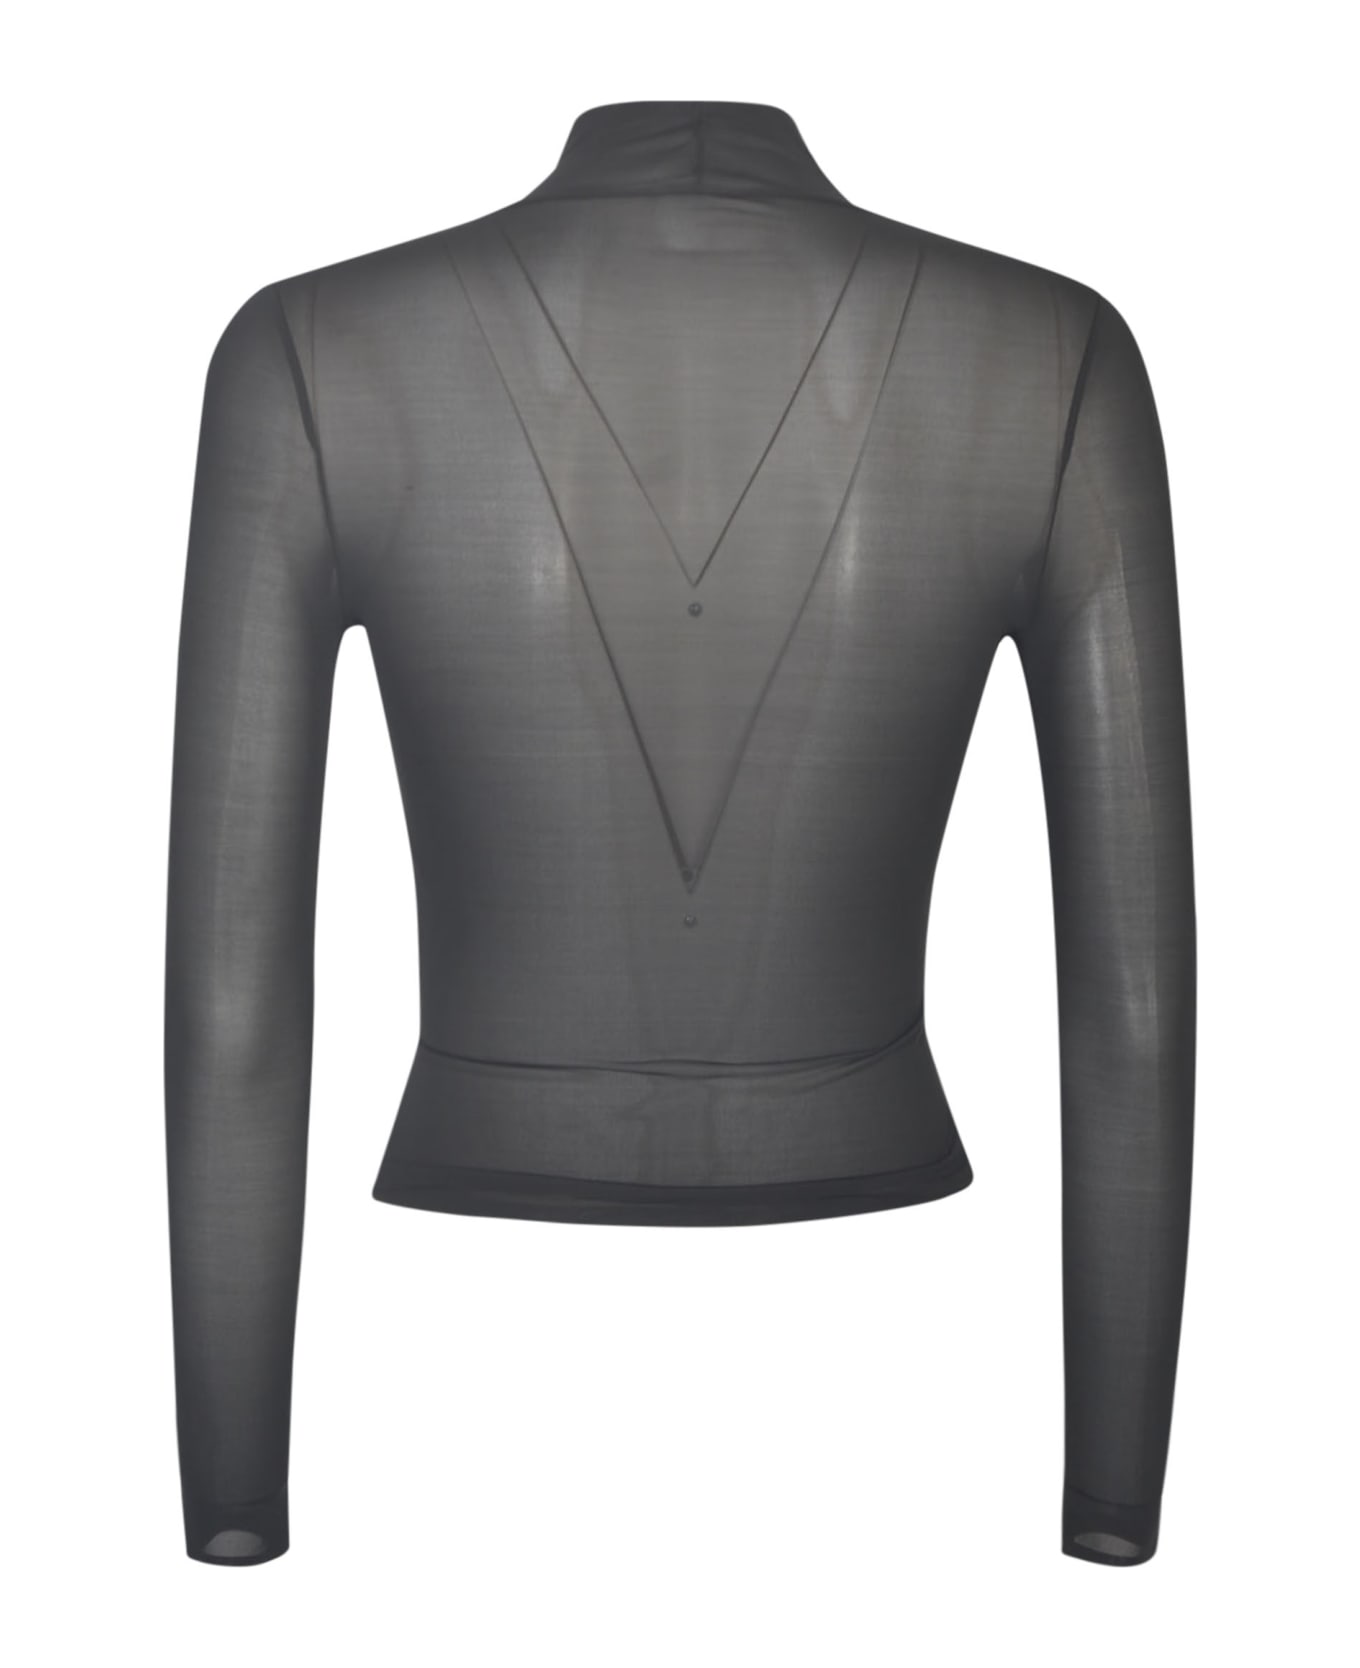 Courrèges See-through Fitted Top - BLACK